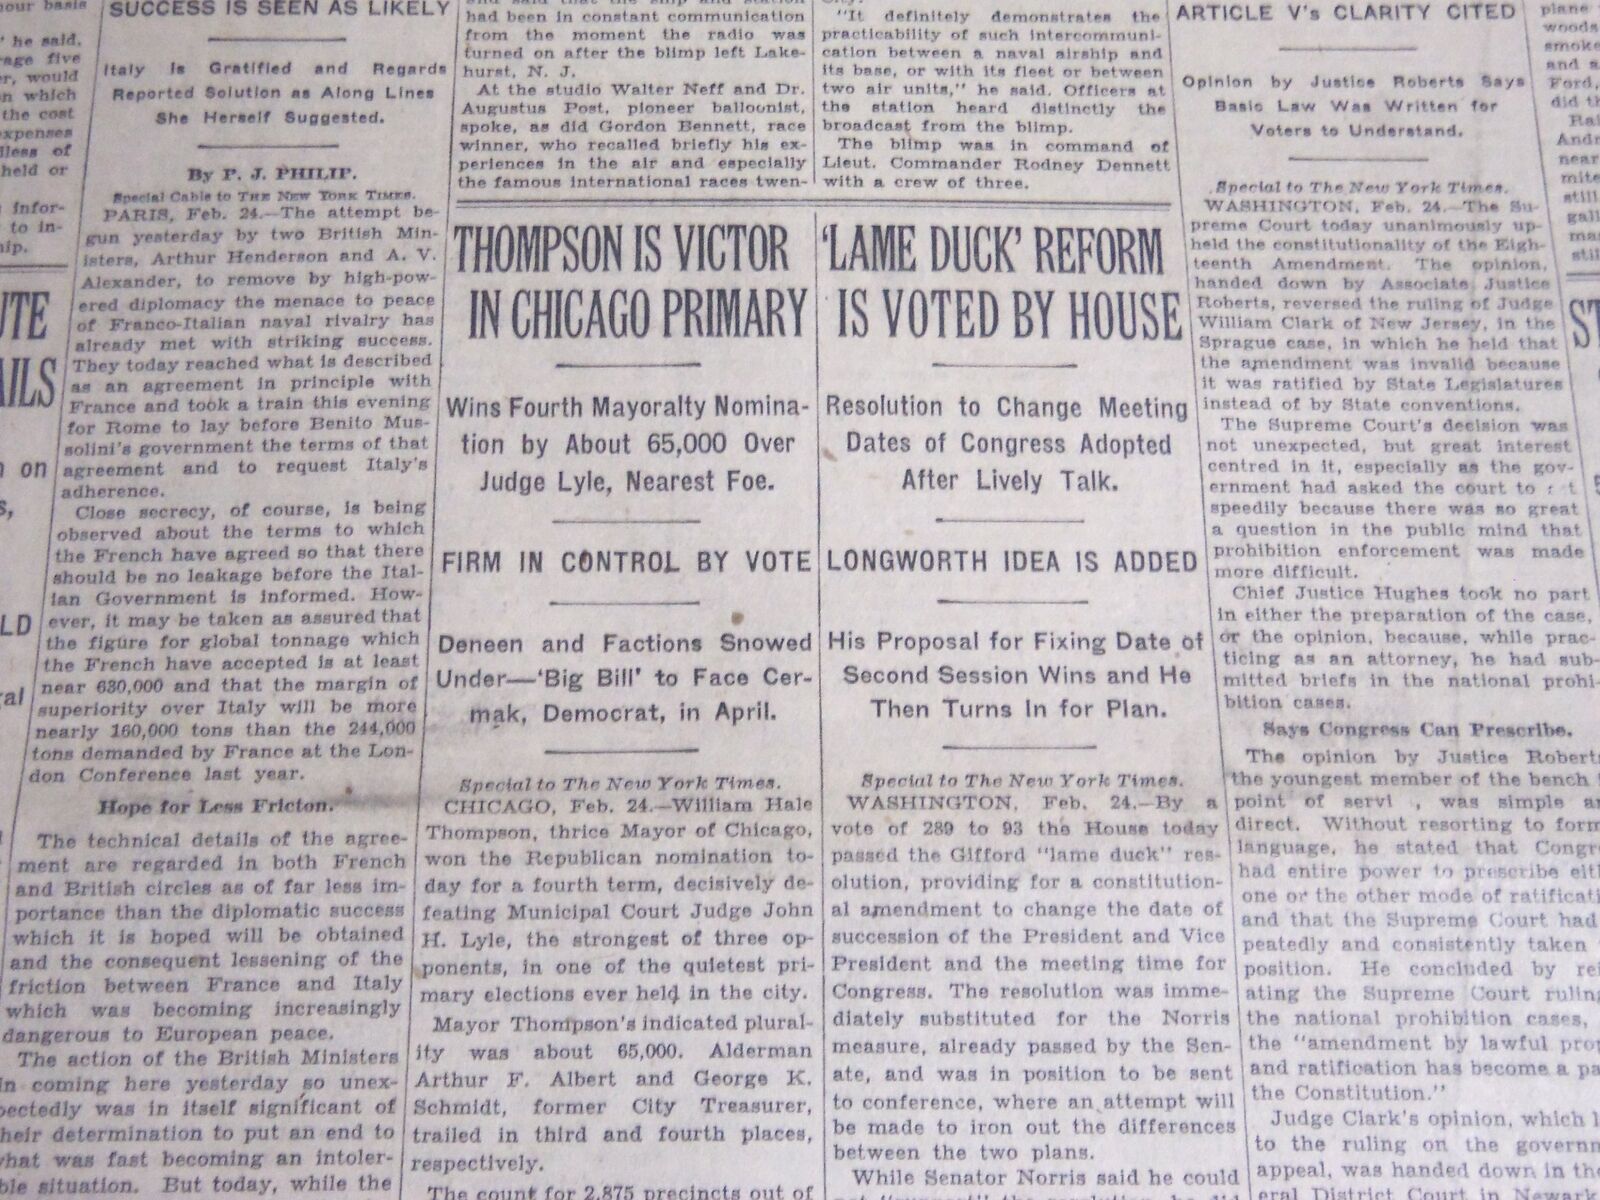 1931 FEB 25 NEW YORK TIMES - THOMPSON IS VICTOR IN CHICAGO PRIMARY - NT 6669